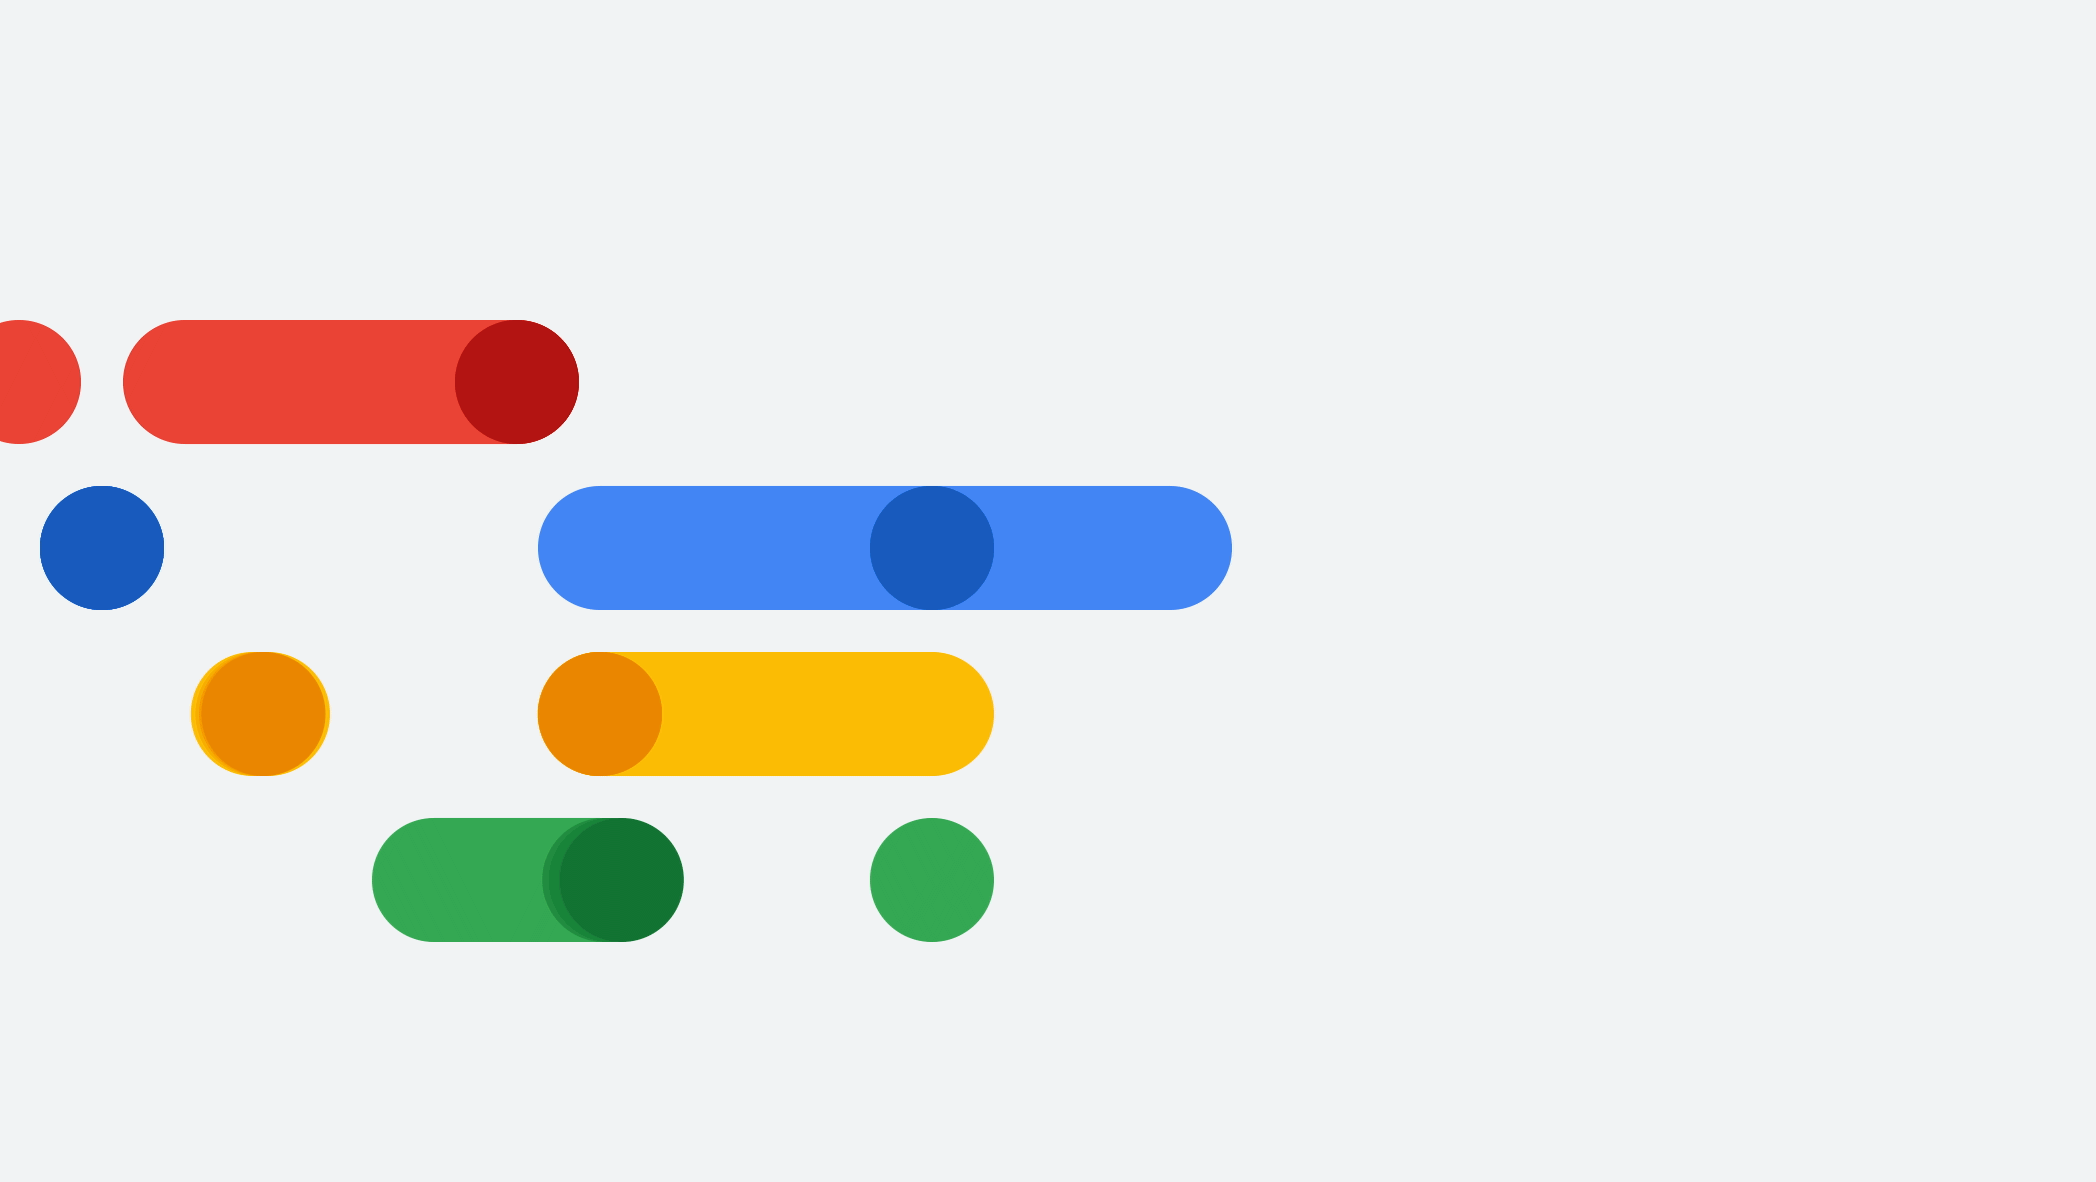 Moving lines and dots in the 4 Google colors